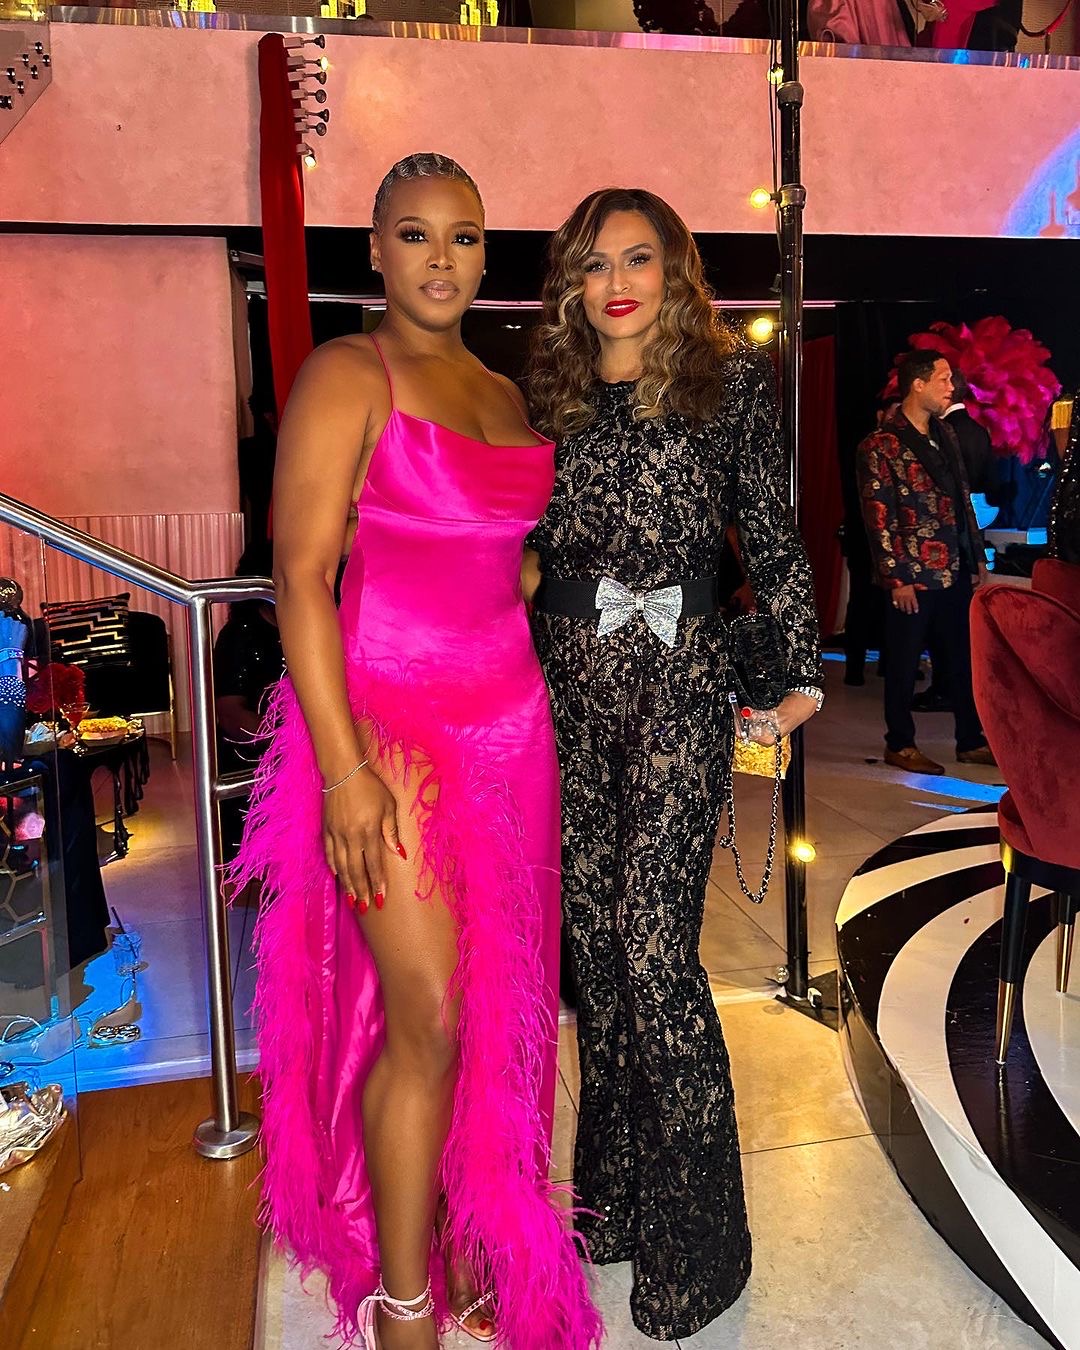 Mielle Organics CEO Monique Rodriguez Celebrated Her 40th Birthday in a Pink Custom Nicole Felicia Gown with Rene Caovilla Heels to her Cirque Du Moleil Theme Party More 9